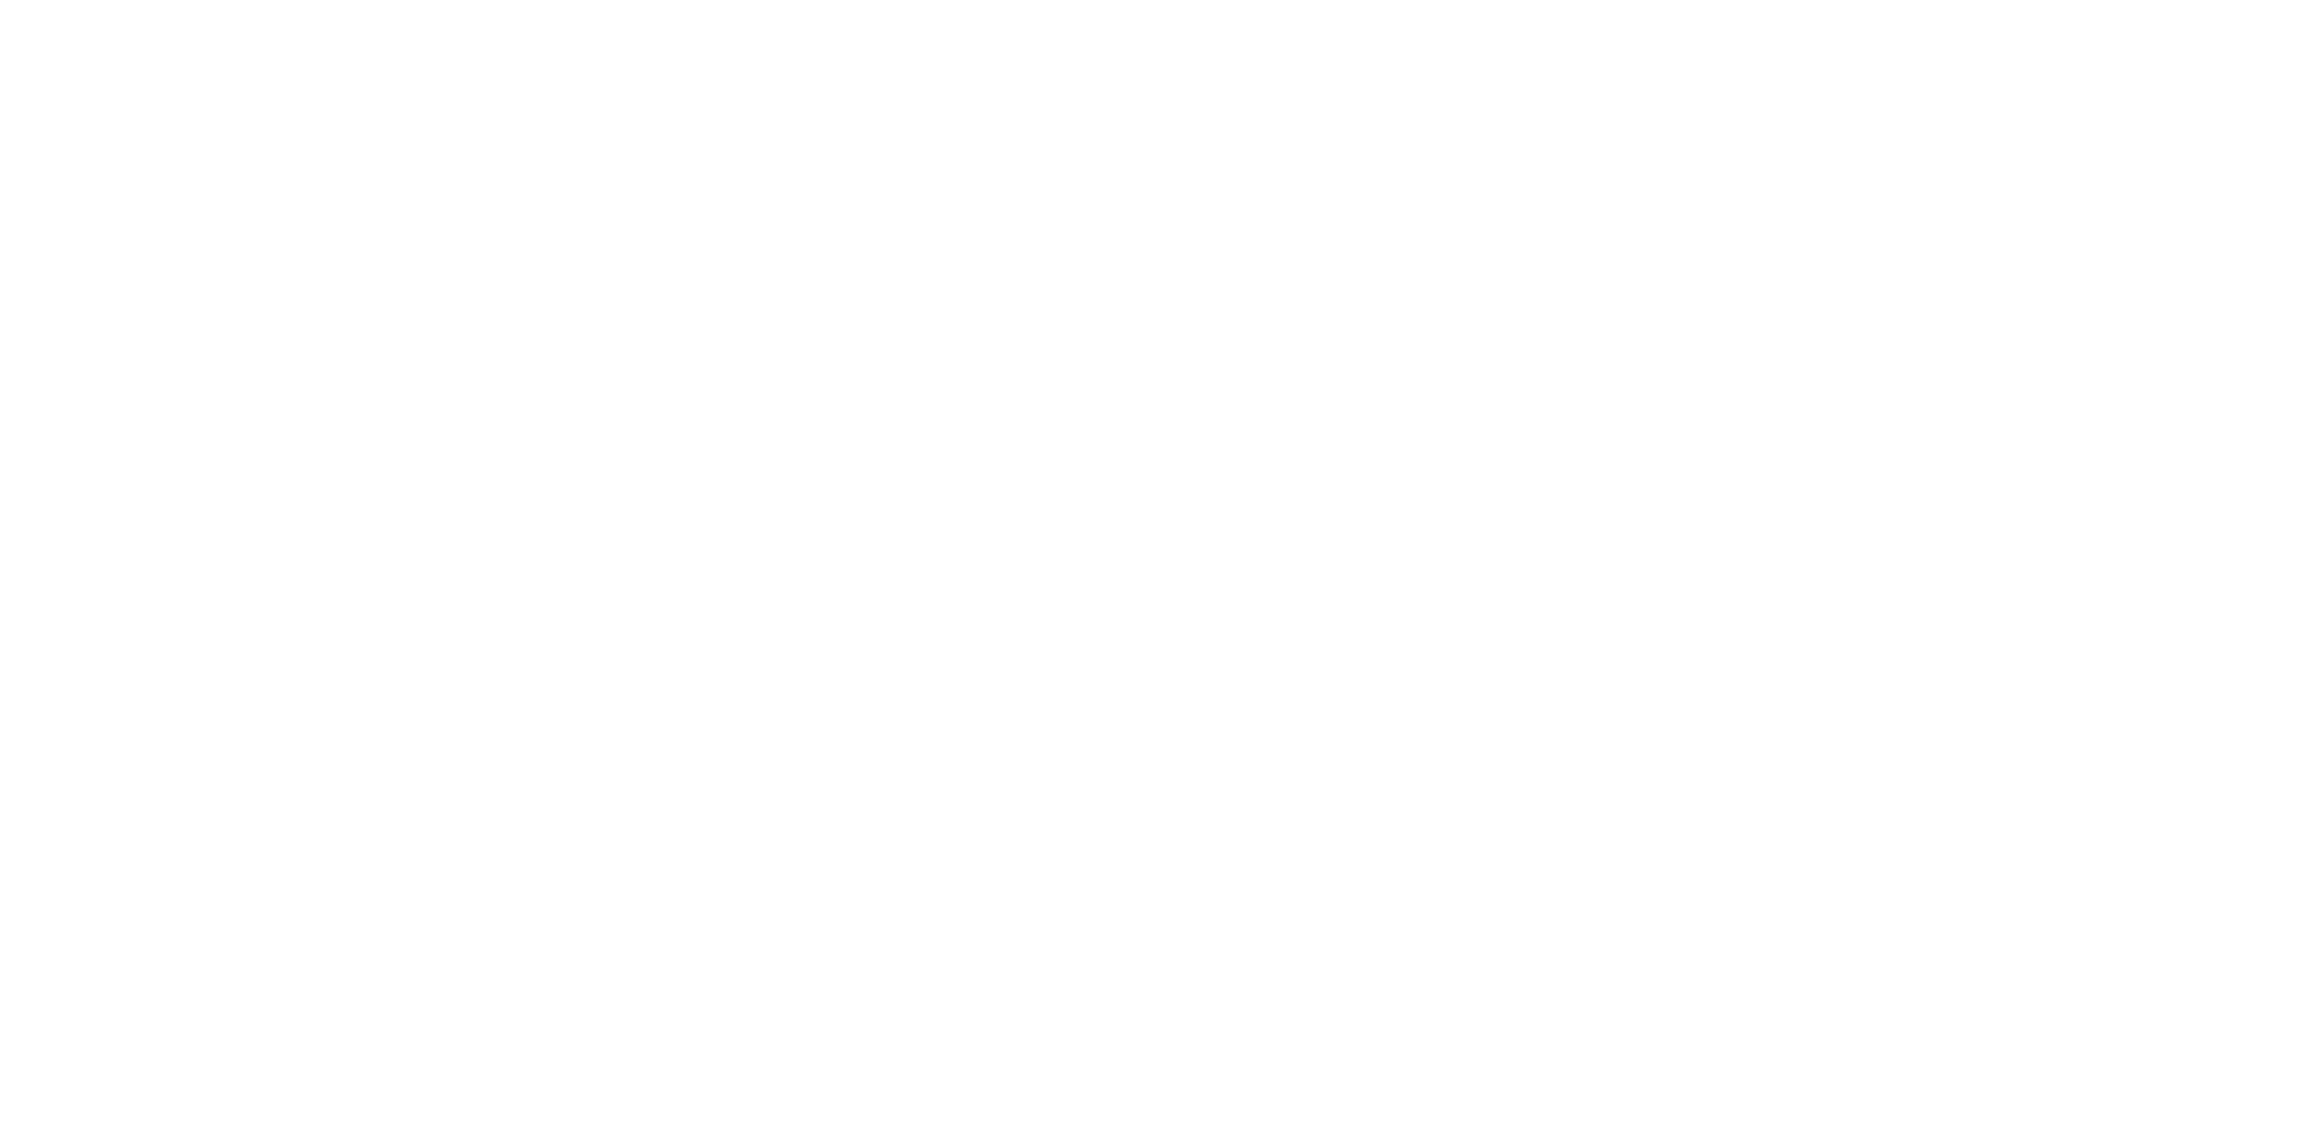 Ceres Property